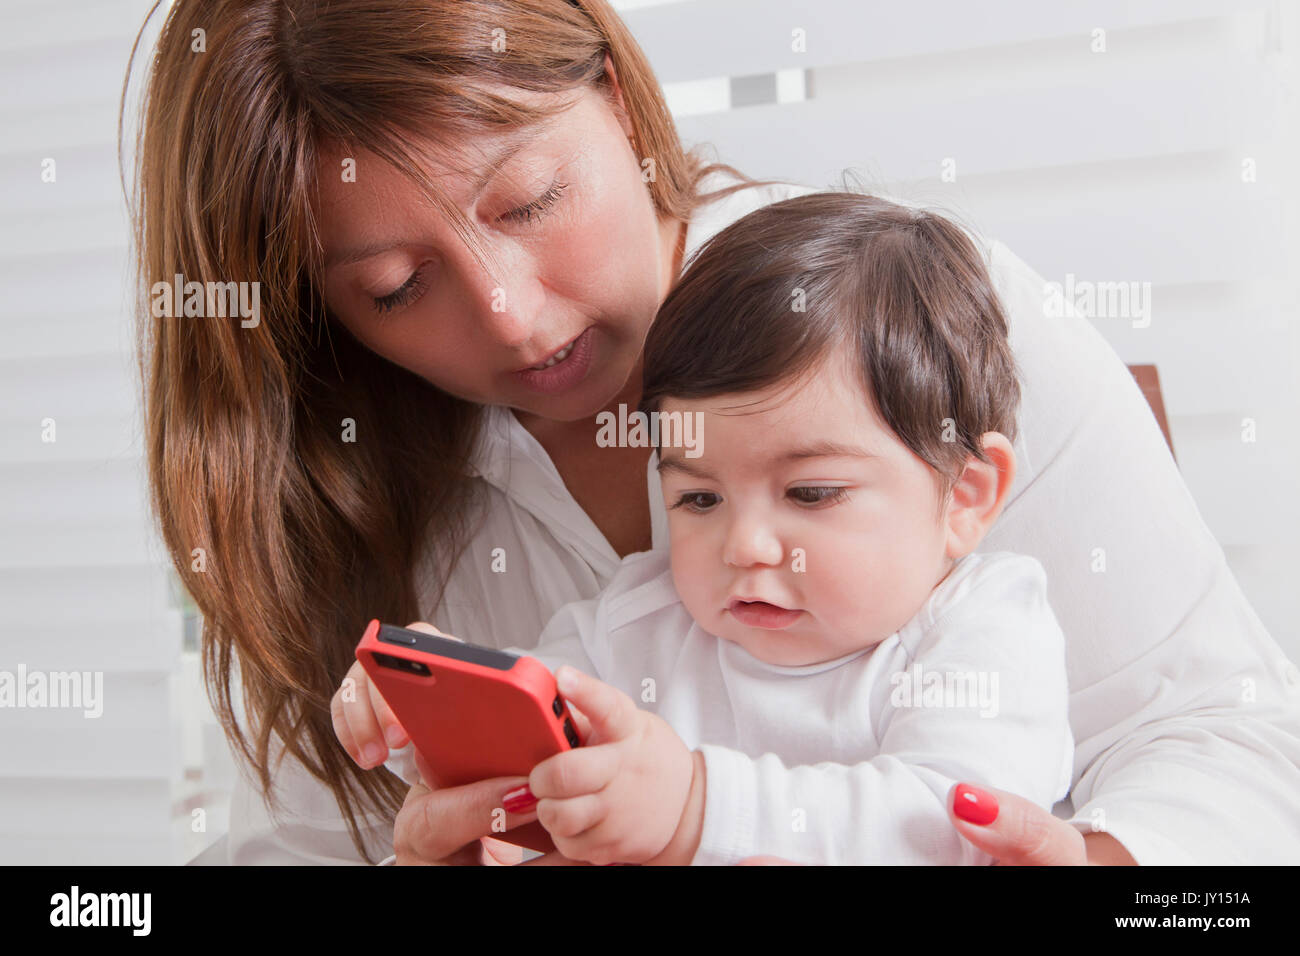 Hispanic mother holding baby boy playing with cell phone Stock Photo